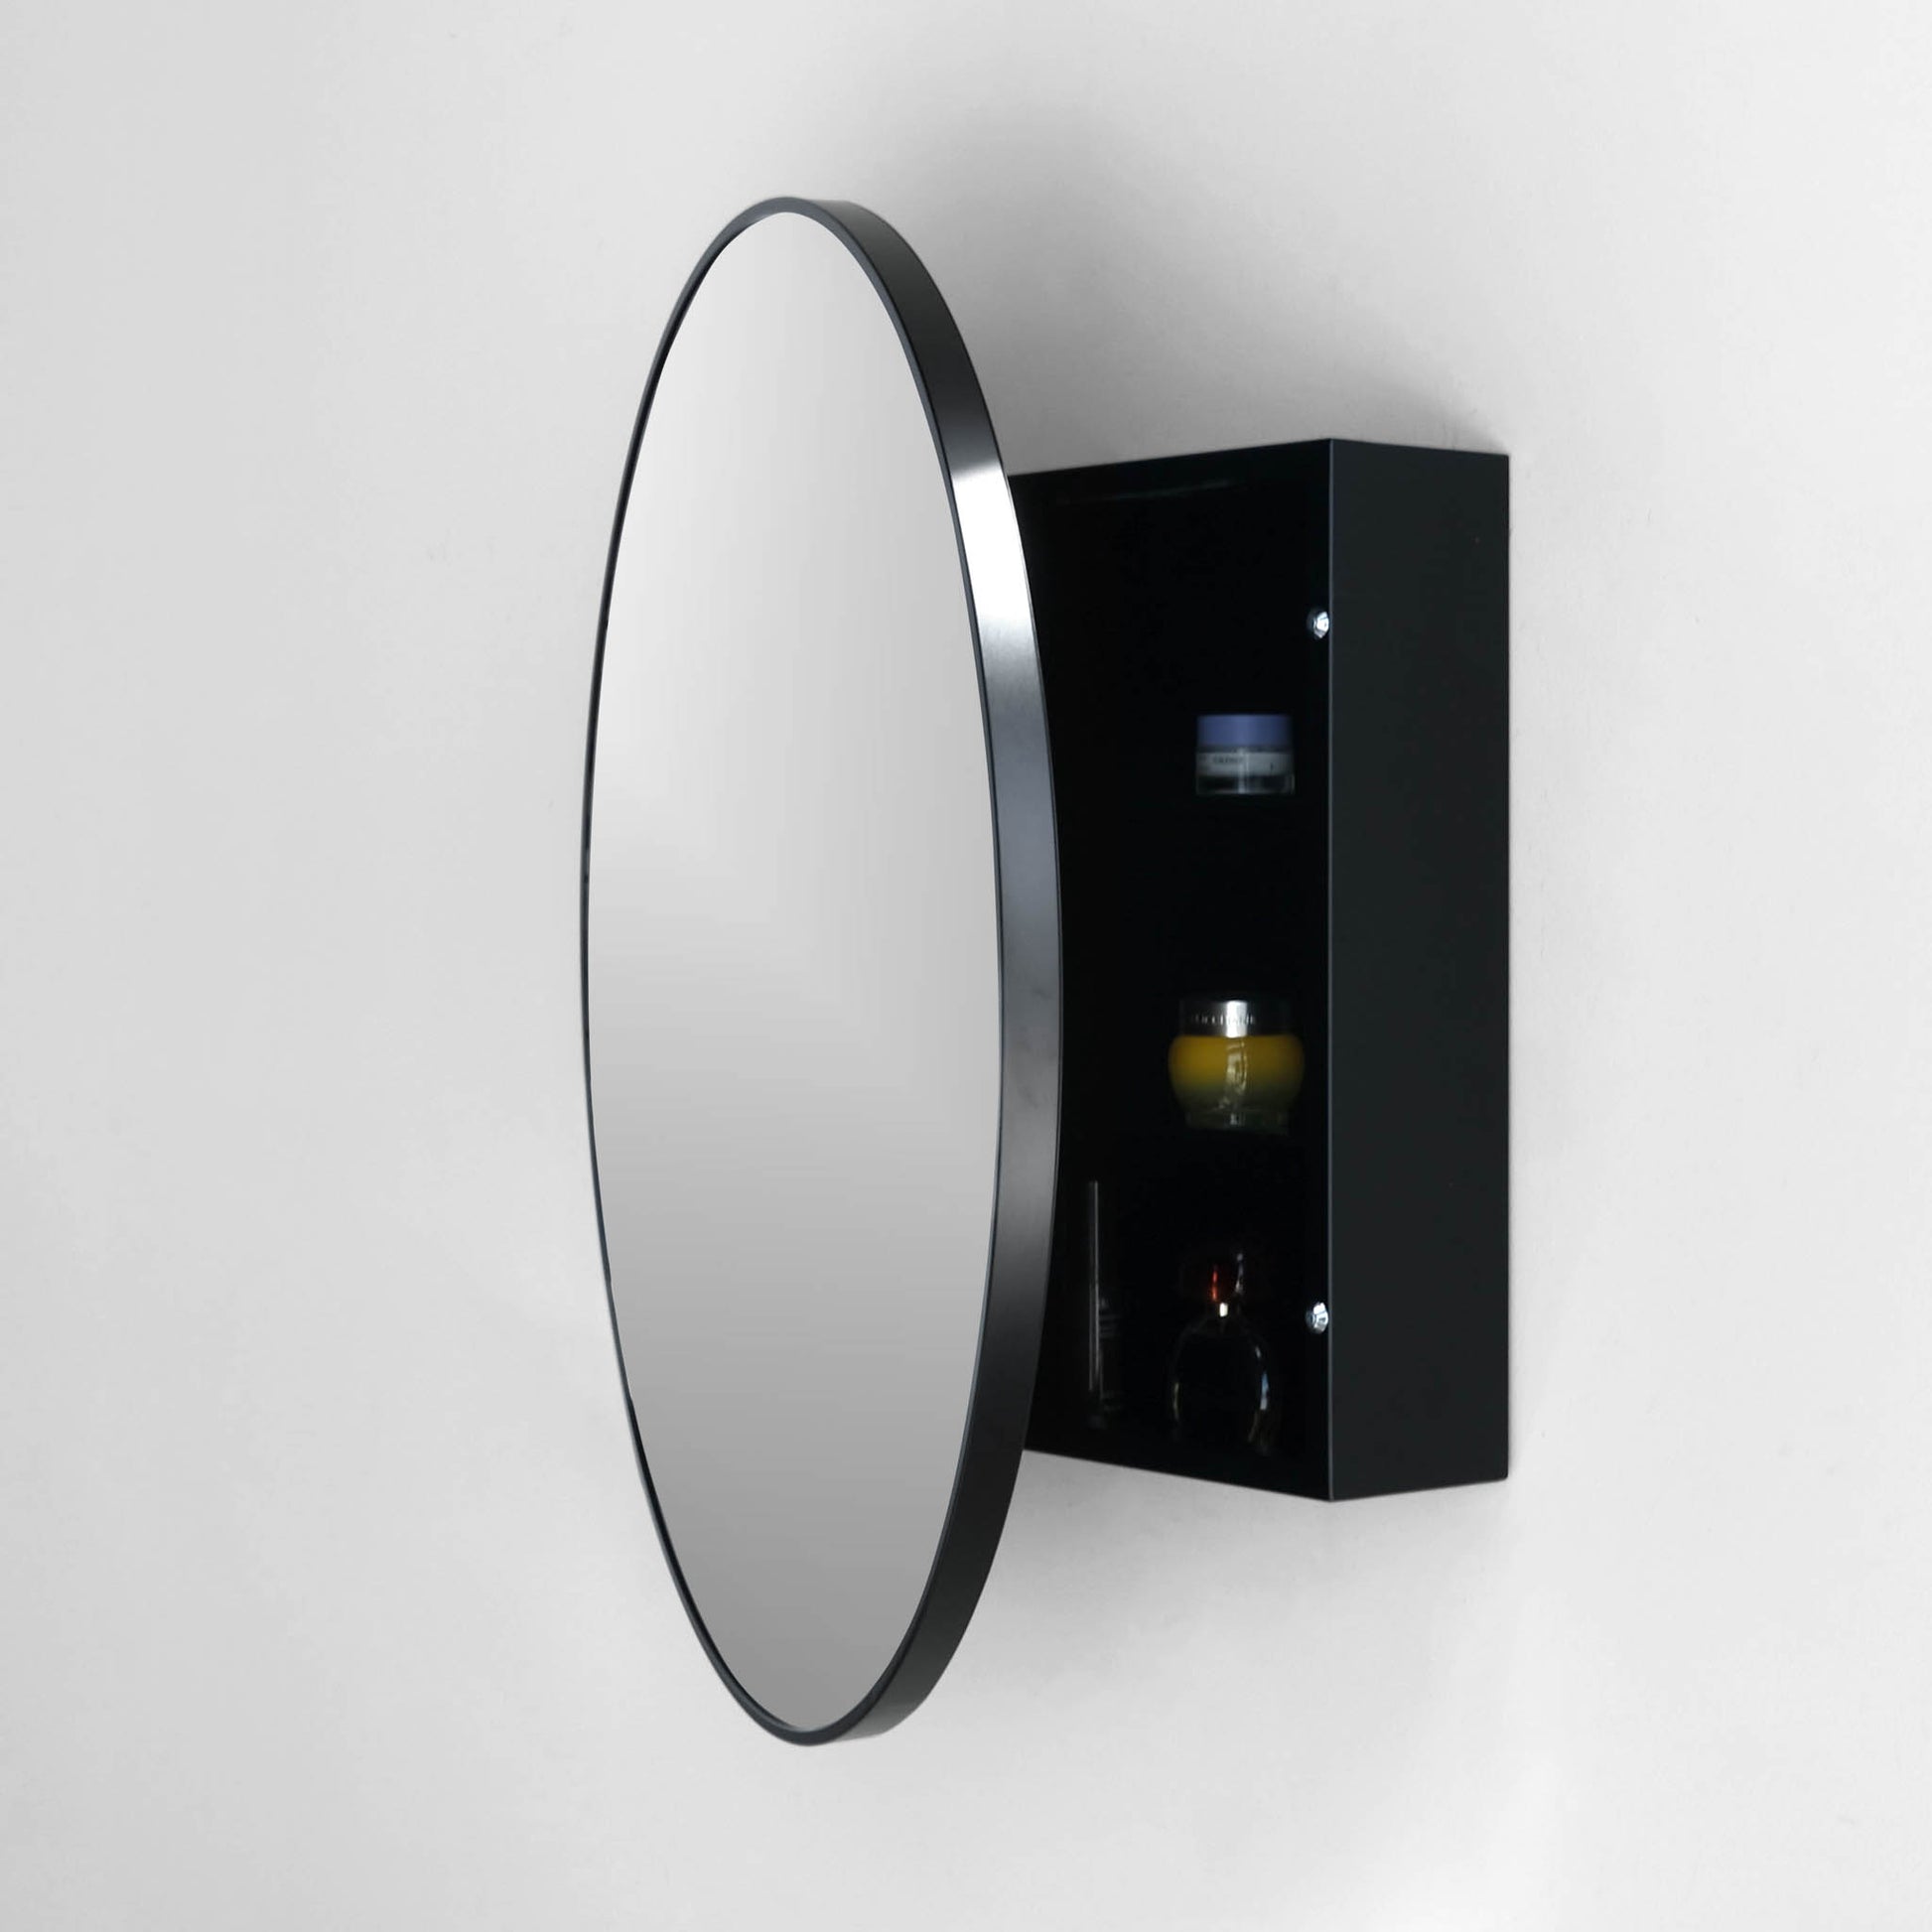 open view of round black medicine cabinet showing 3 shelves